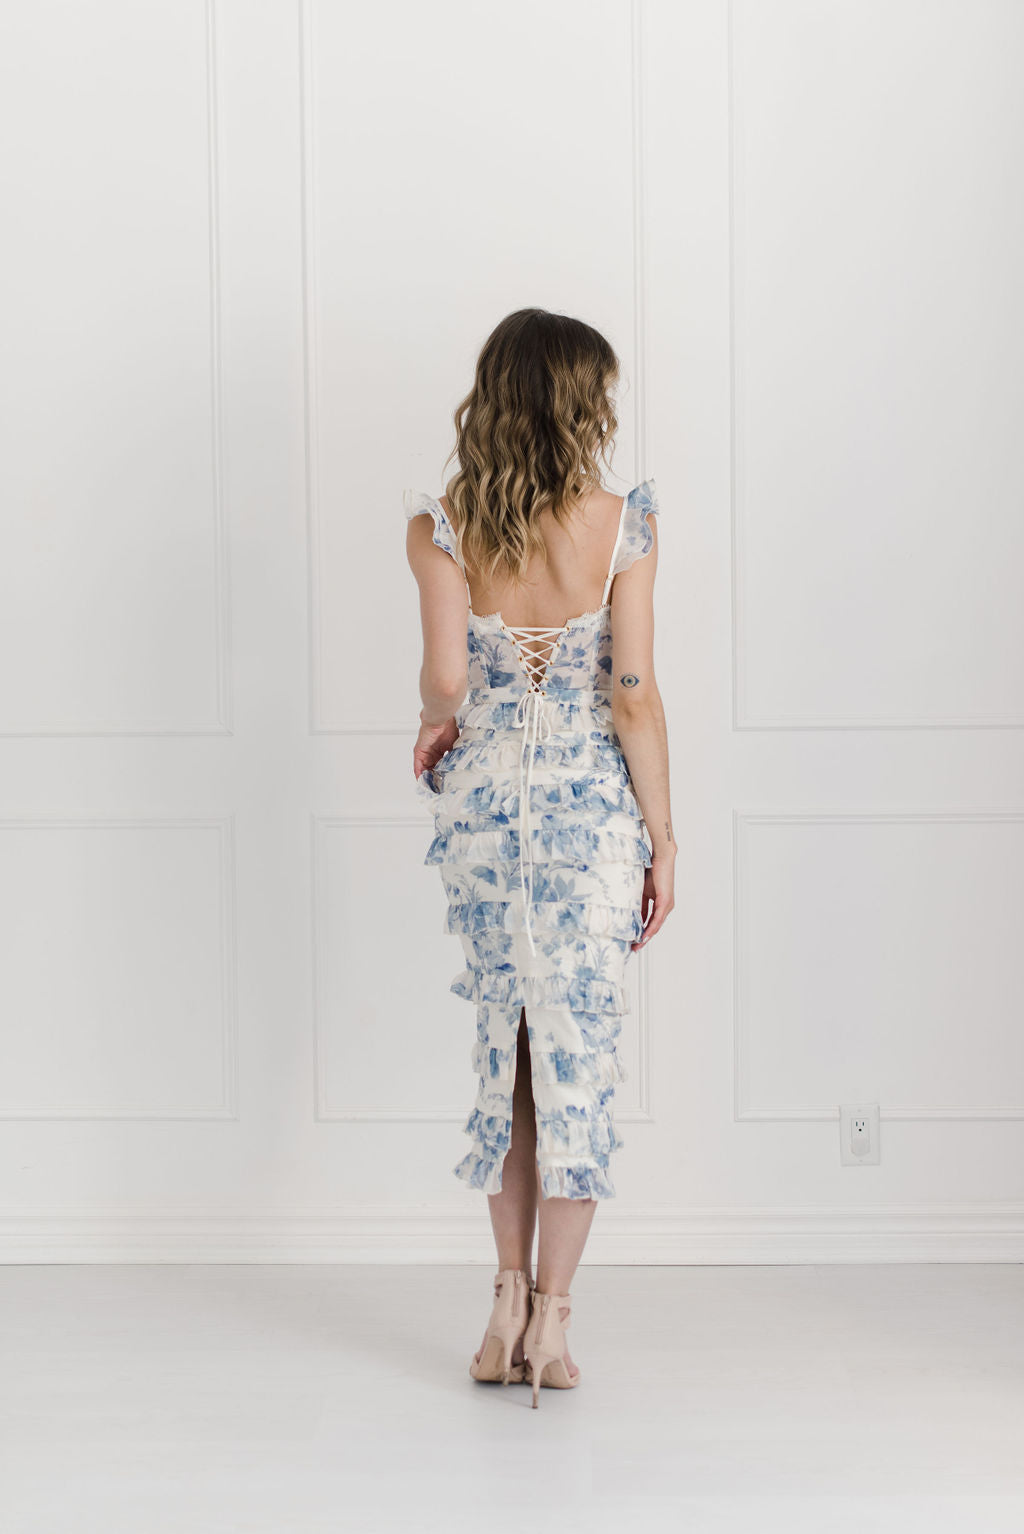 The Lisianthus Dress in Provencal Blue Floral